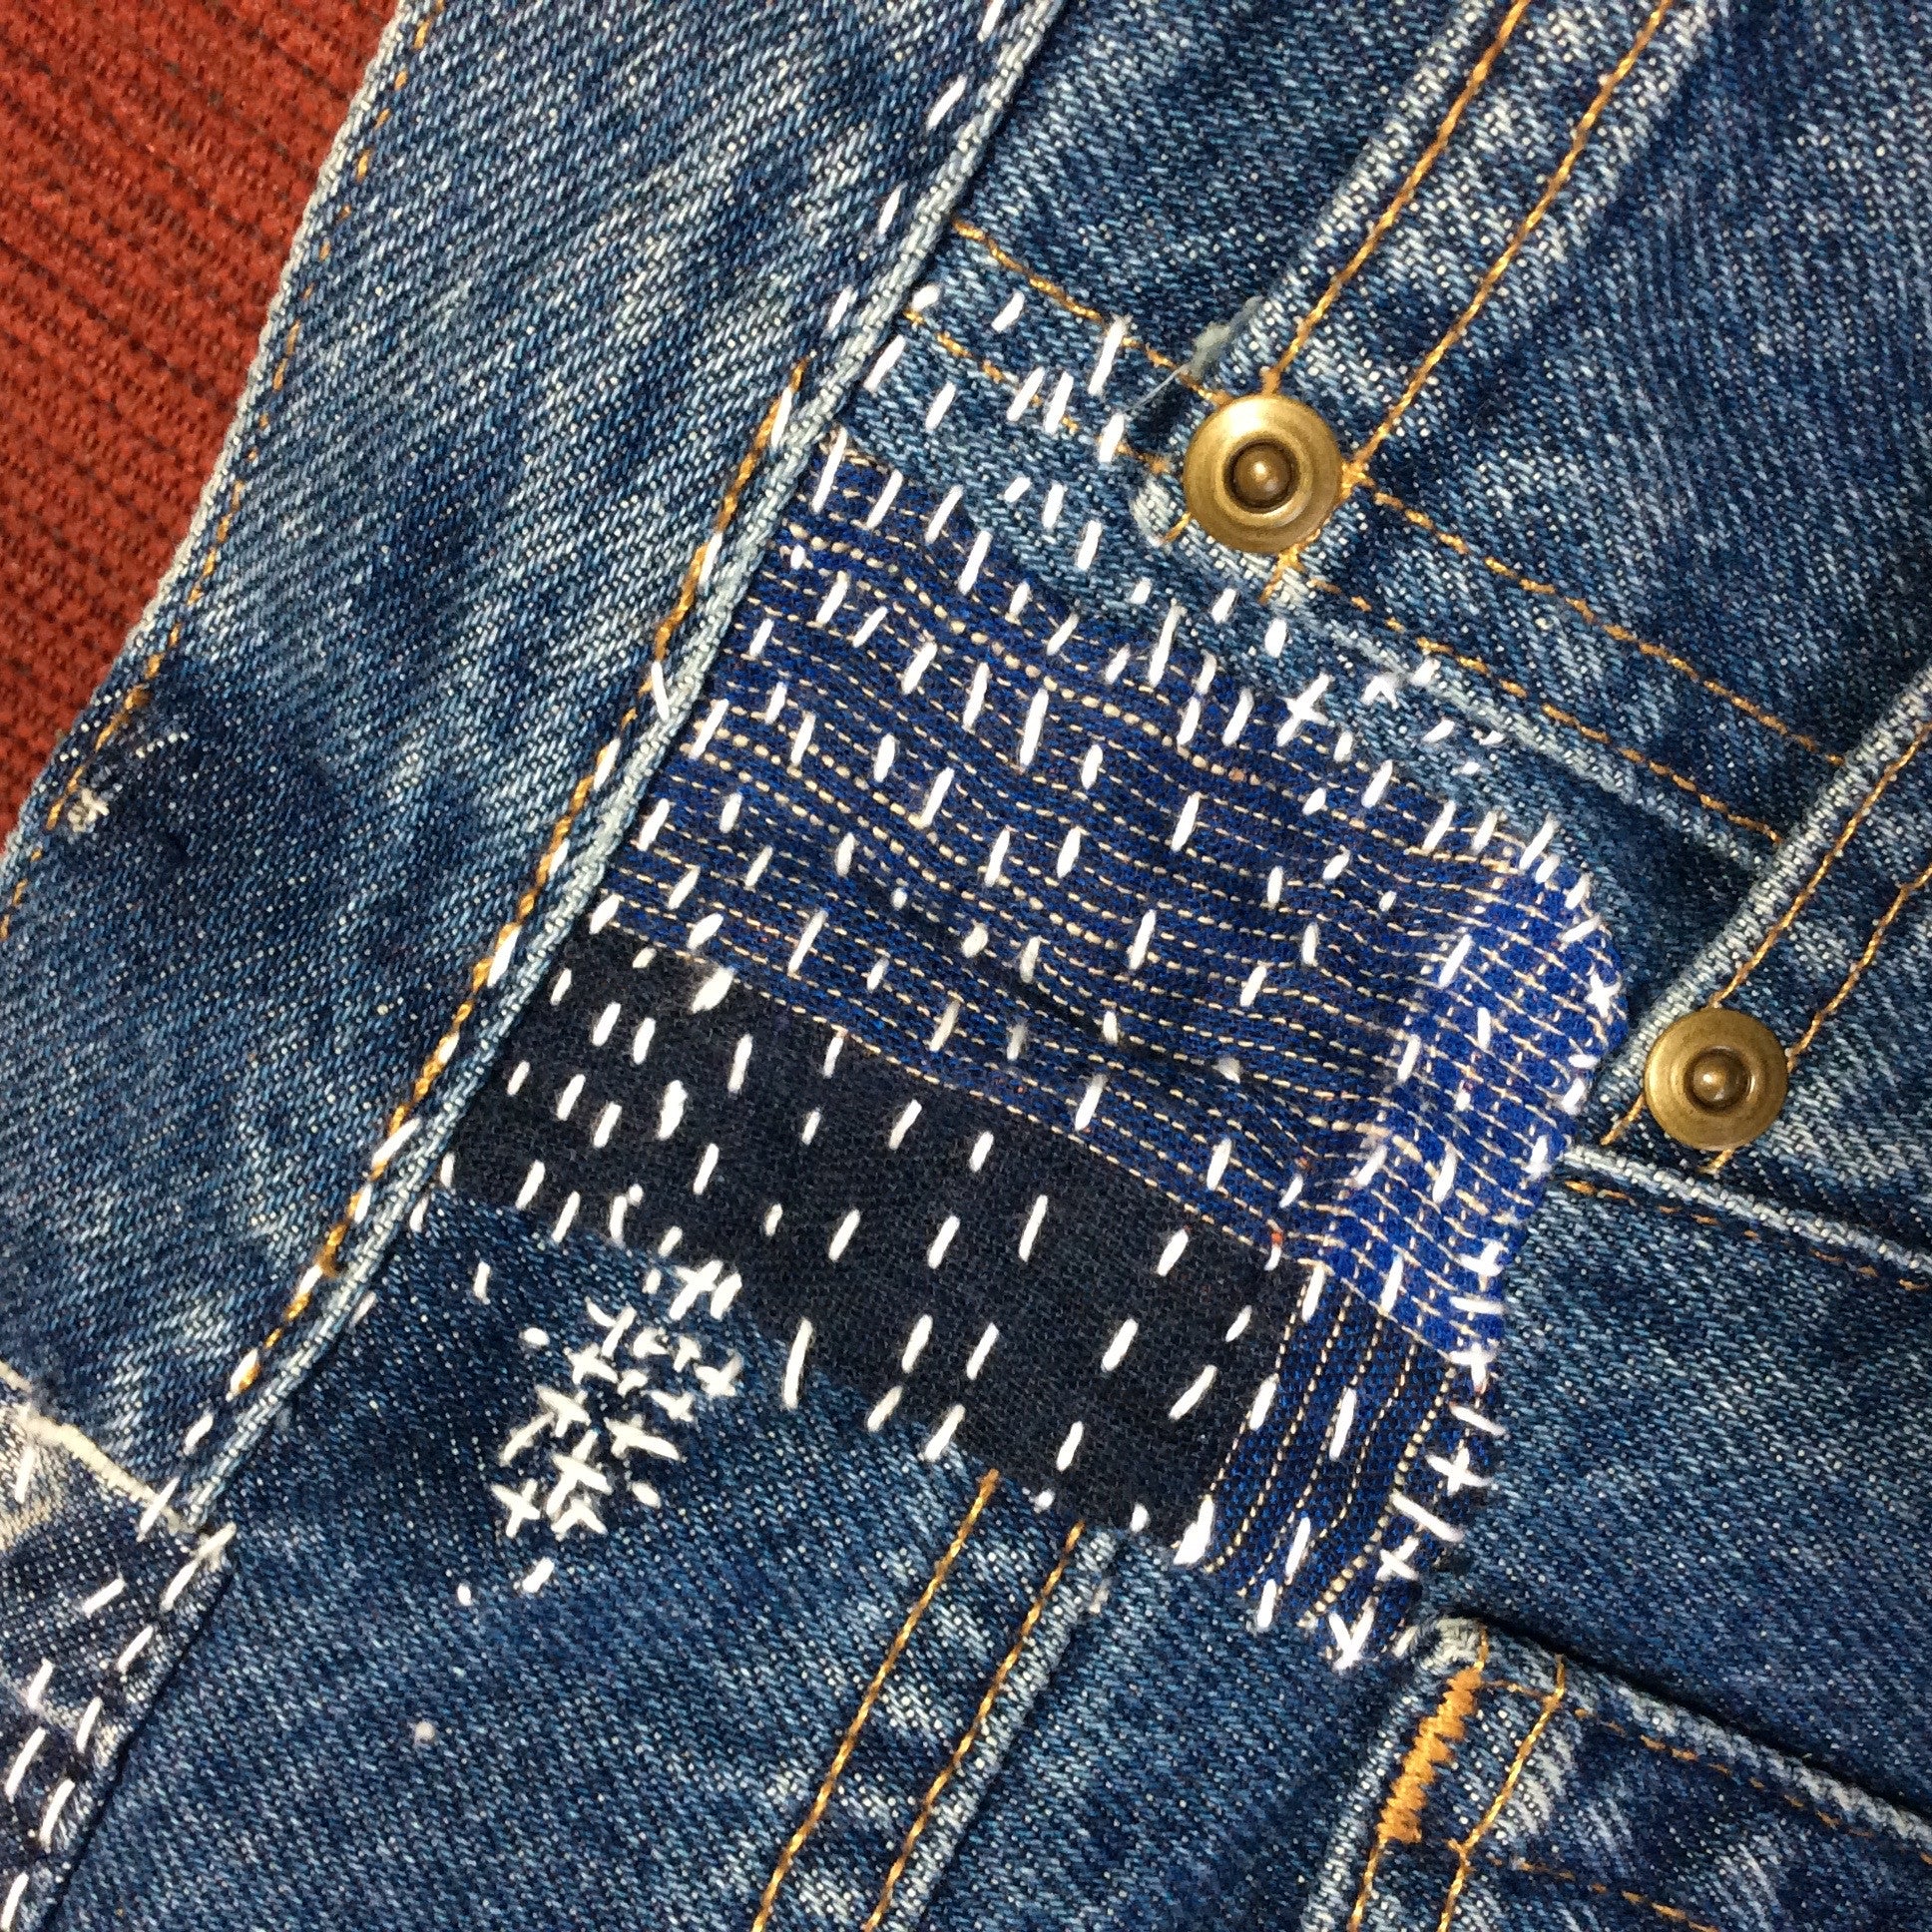 How To - Patching Holes in Knees of Jeans - The Happy Scraps